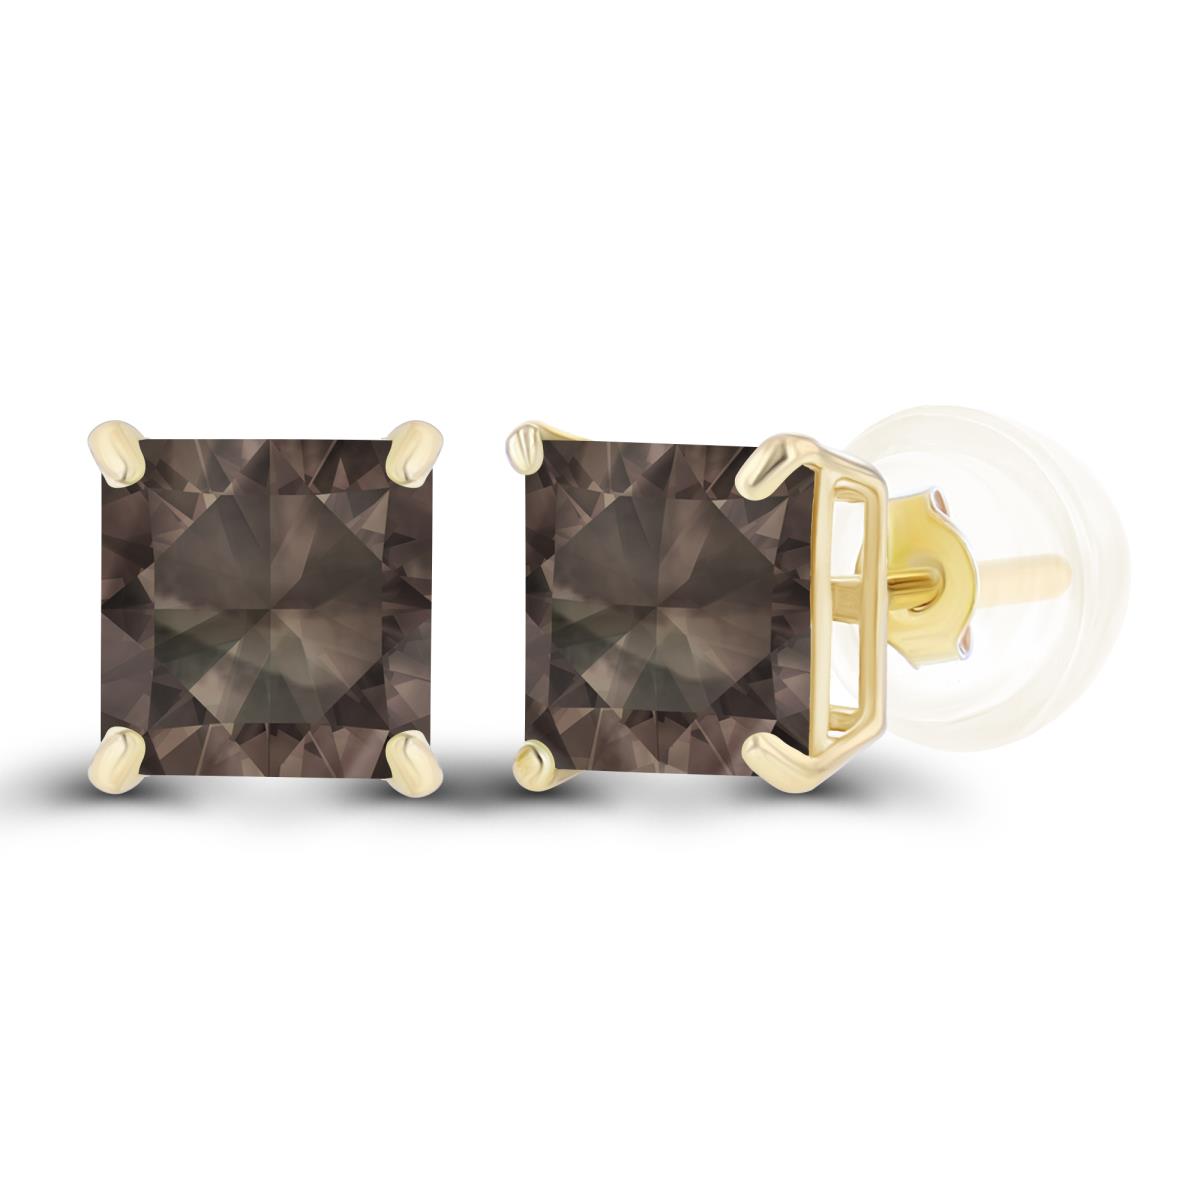 Sterling Silver Yellow 5mm Square Smokey Quartz Basket Stud Earrings with Silicone Back